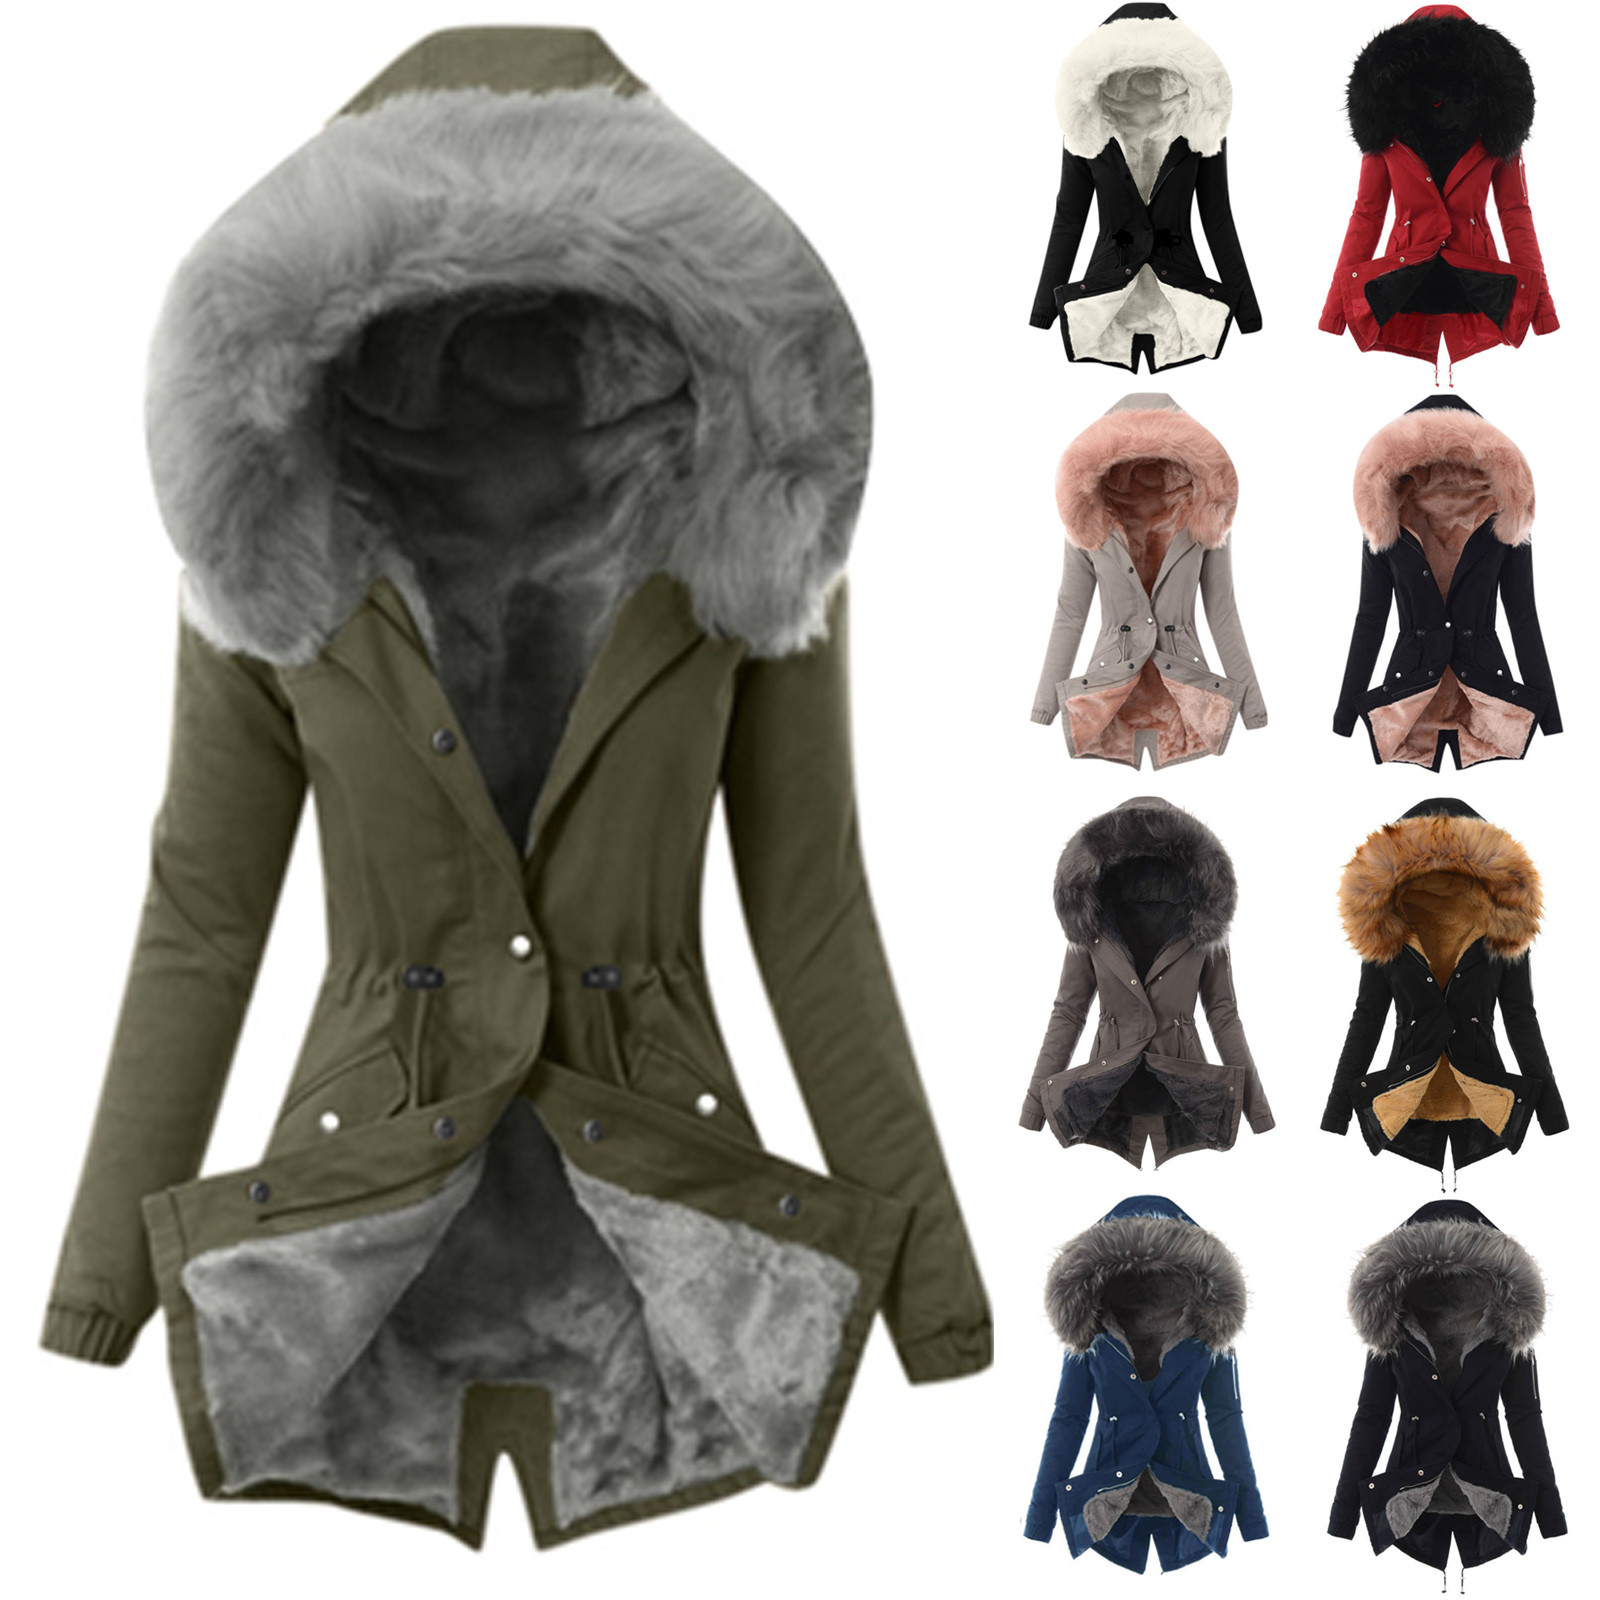 Winter Coats for Women, Women's Winter Warm Jackets Lined Thick ...